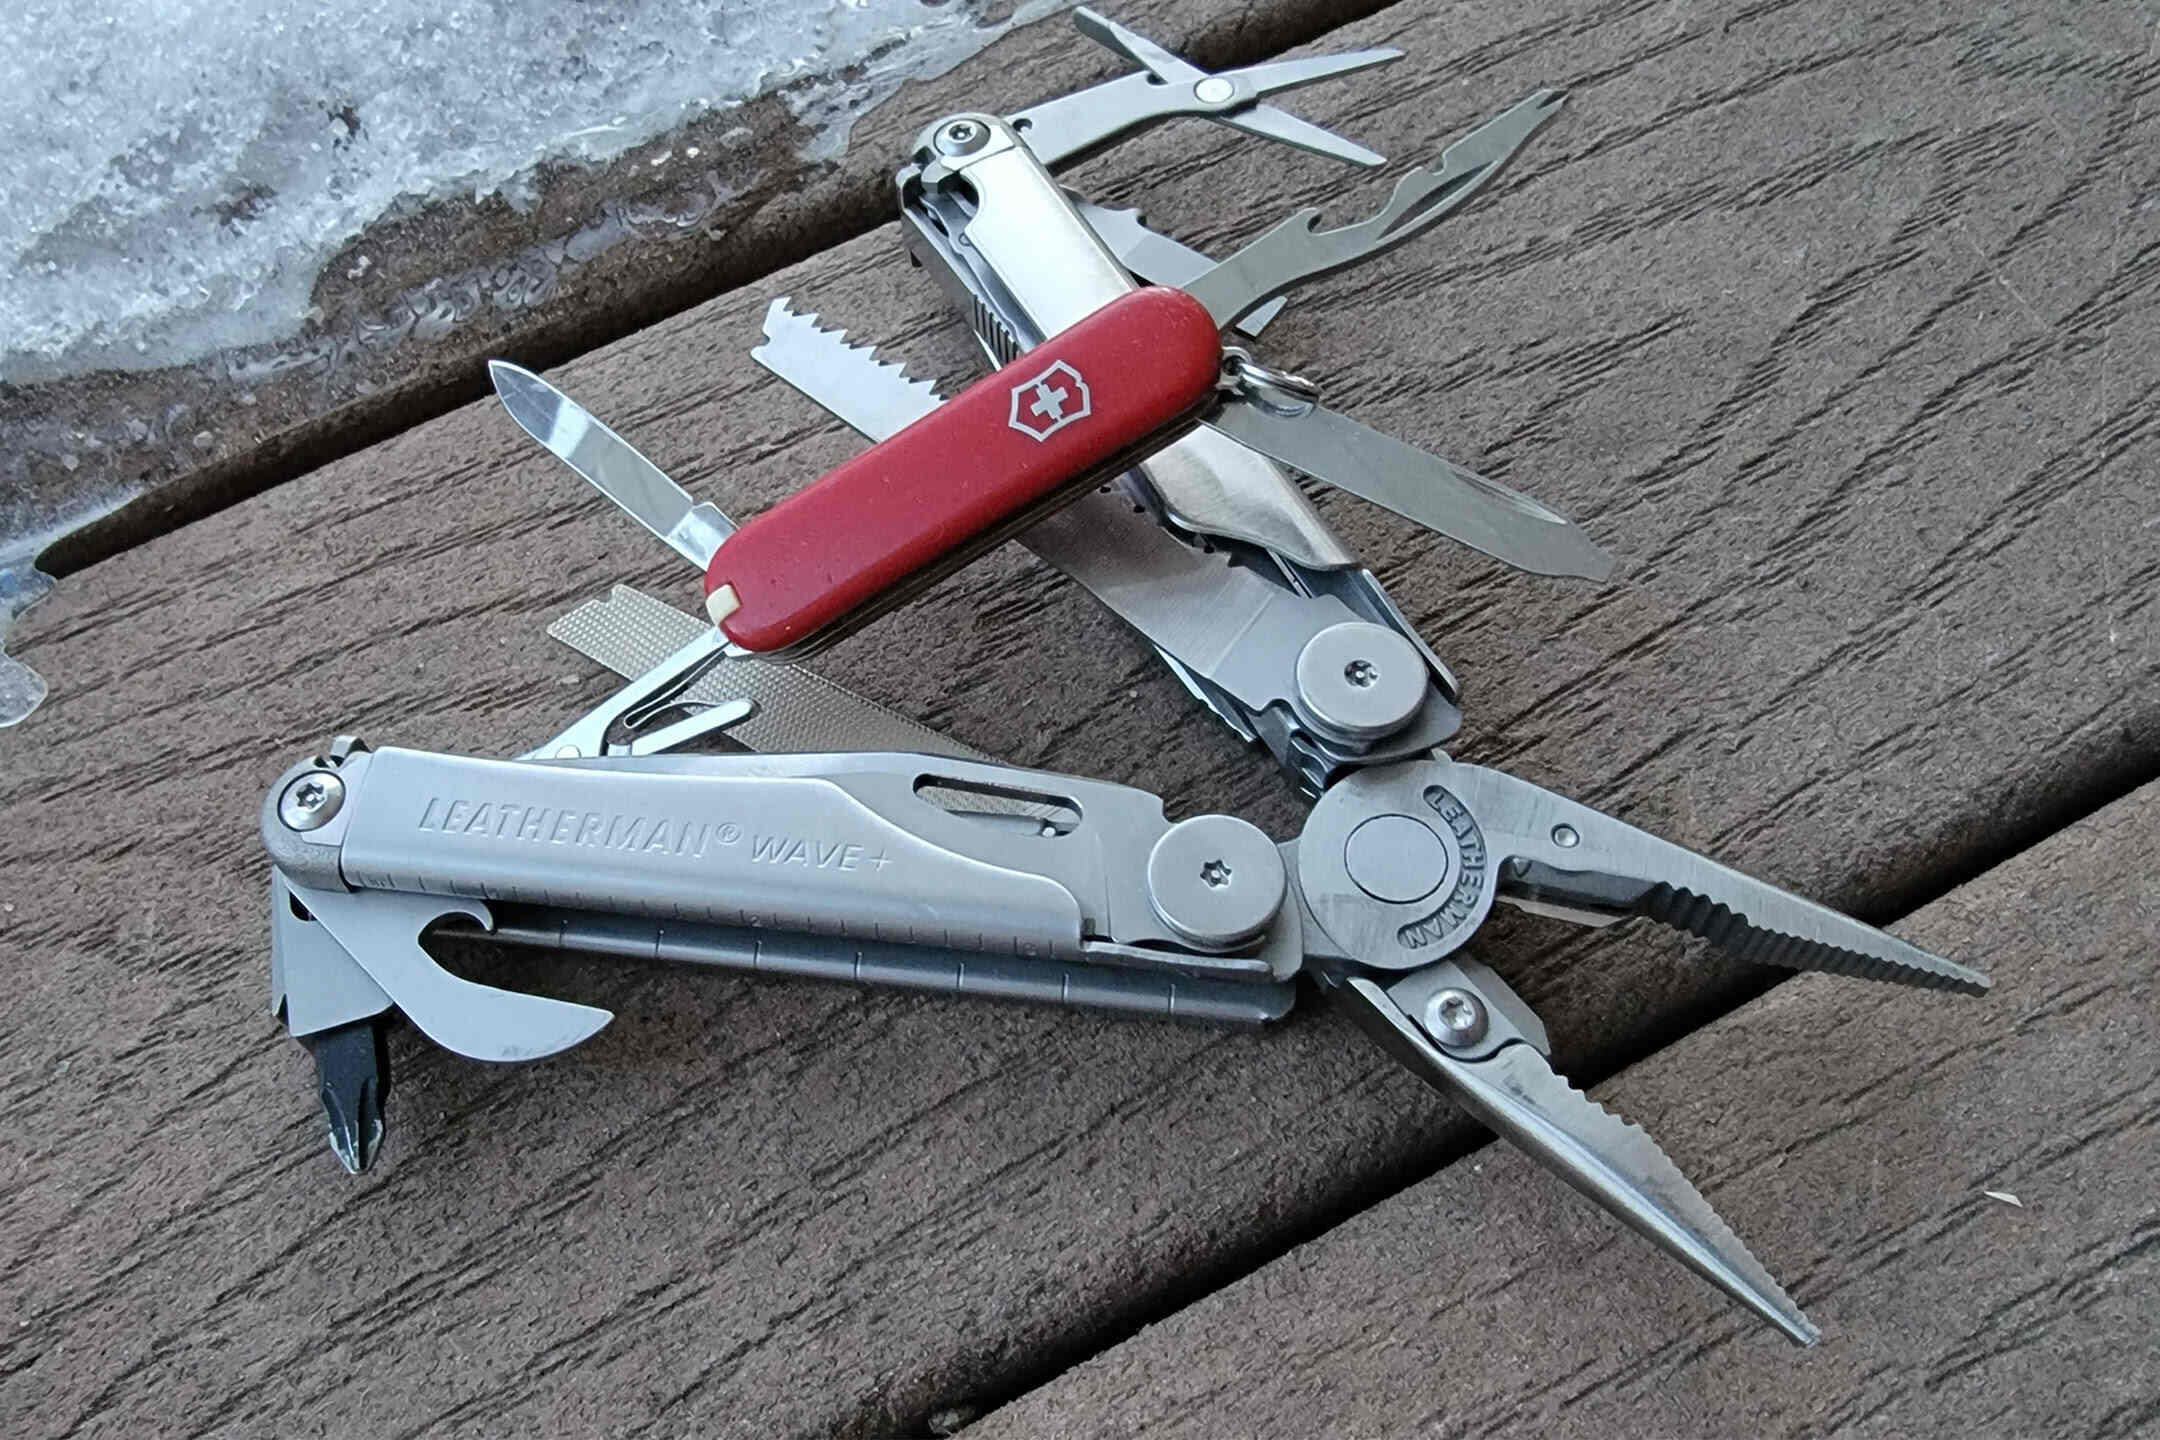 Top Multitool Review: The Best Tools for Every Task